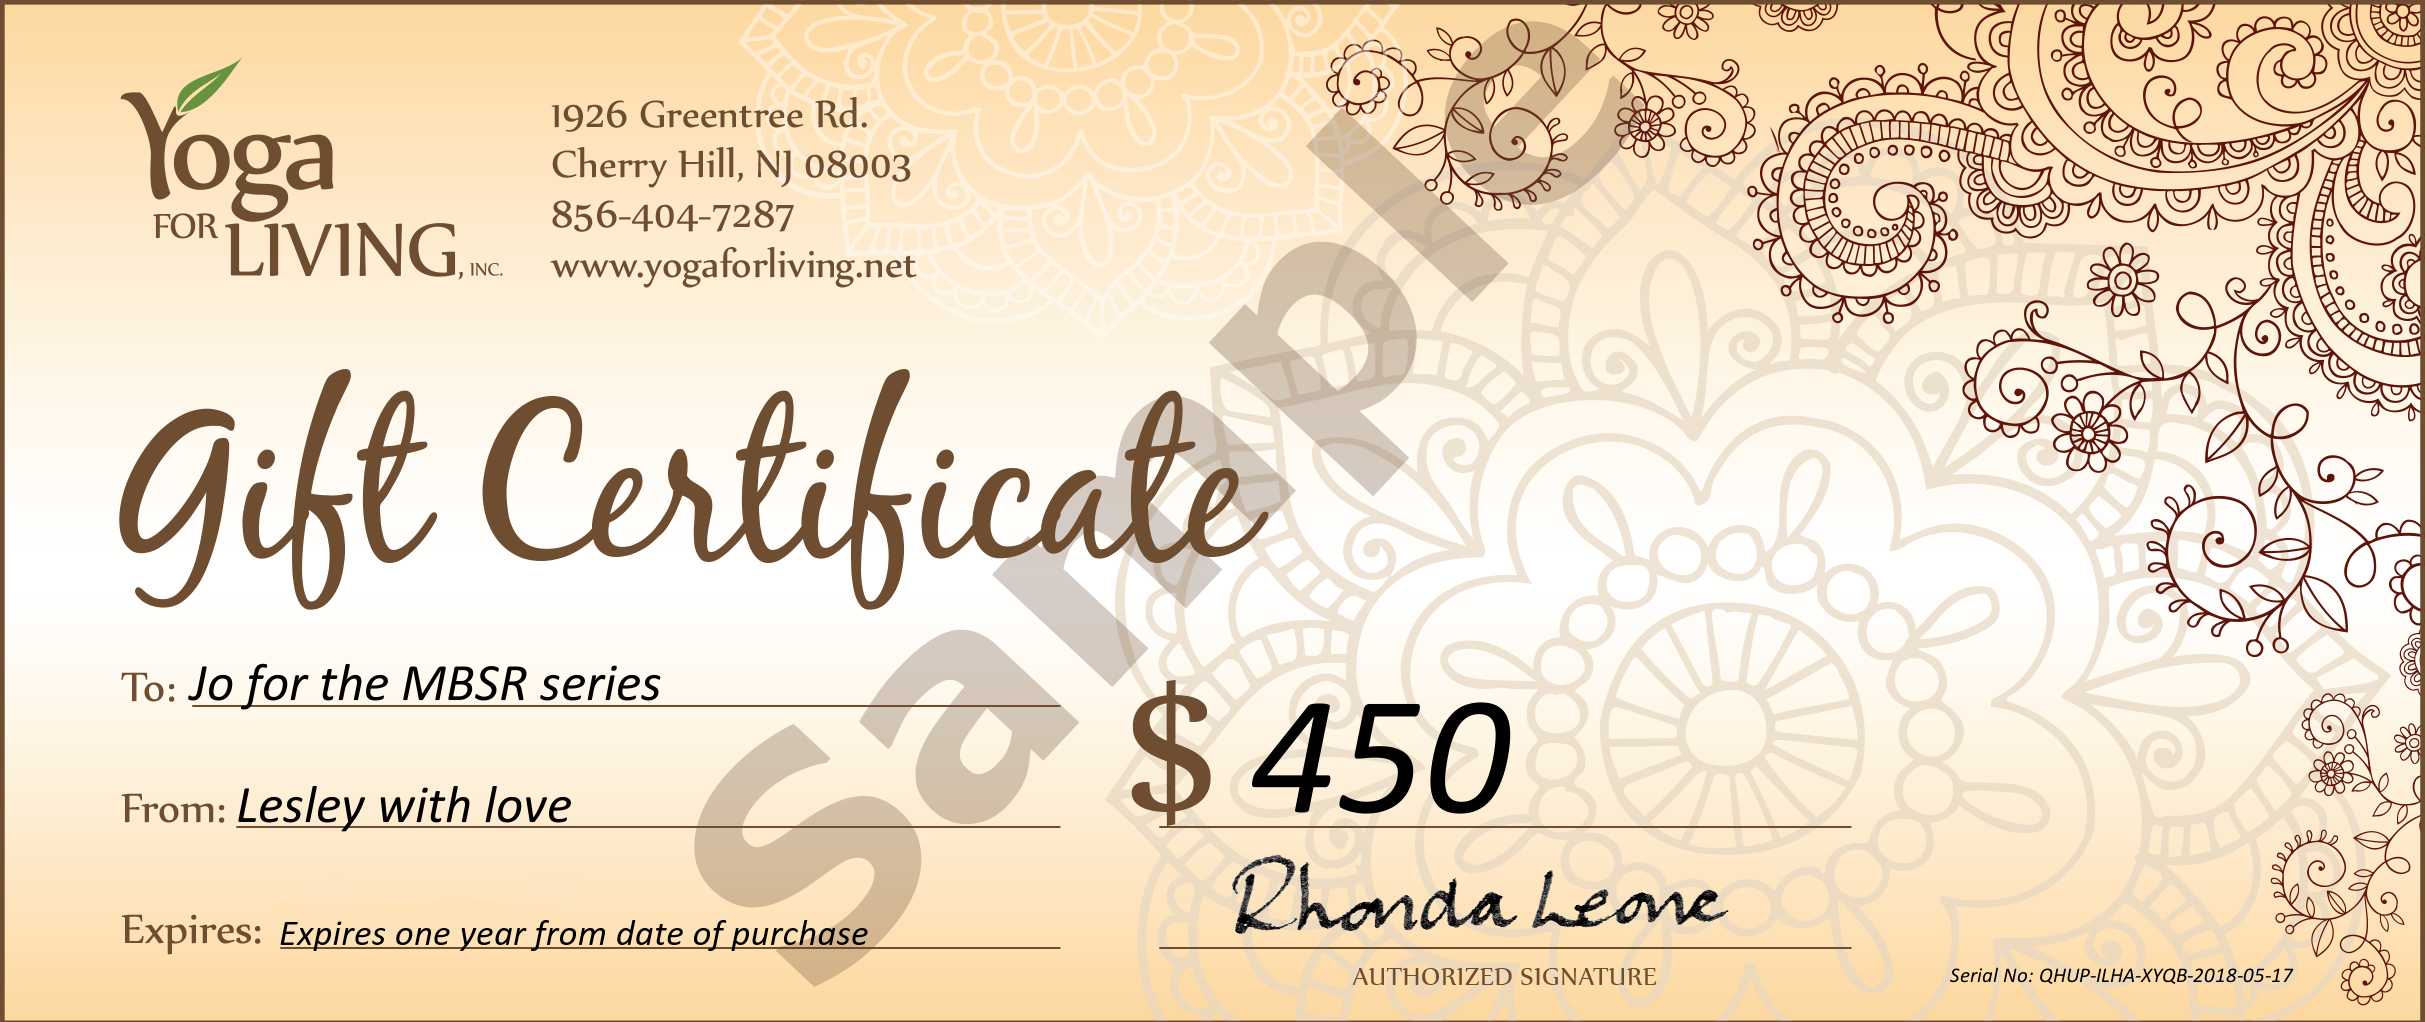 Yogaforliving: Gift Certifcates From Yoga For Living Throughout Yoga Gift Certificate Template Free